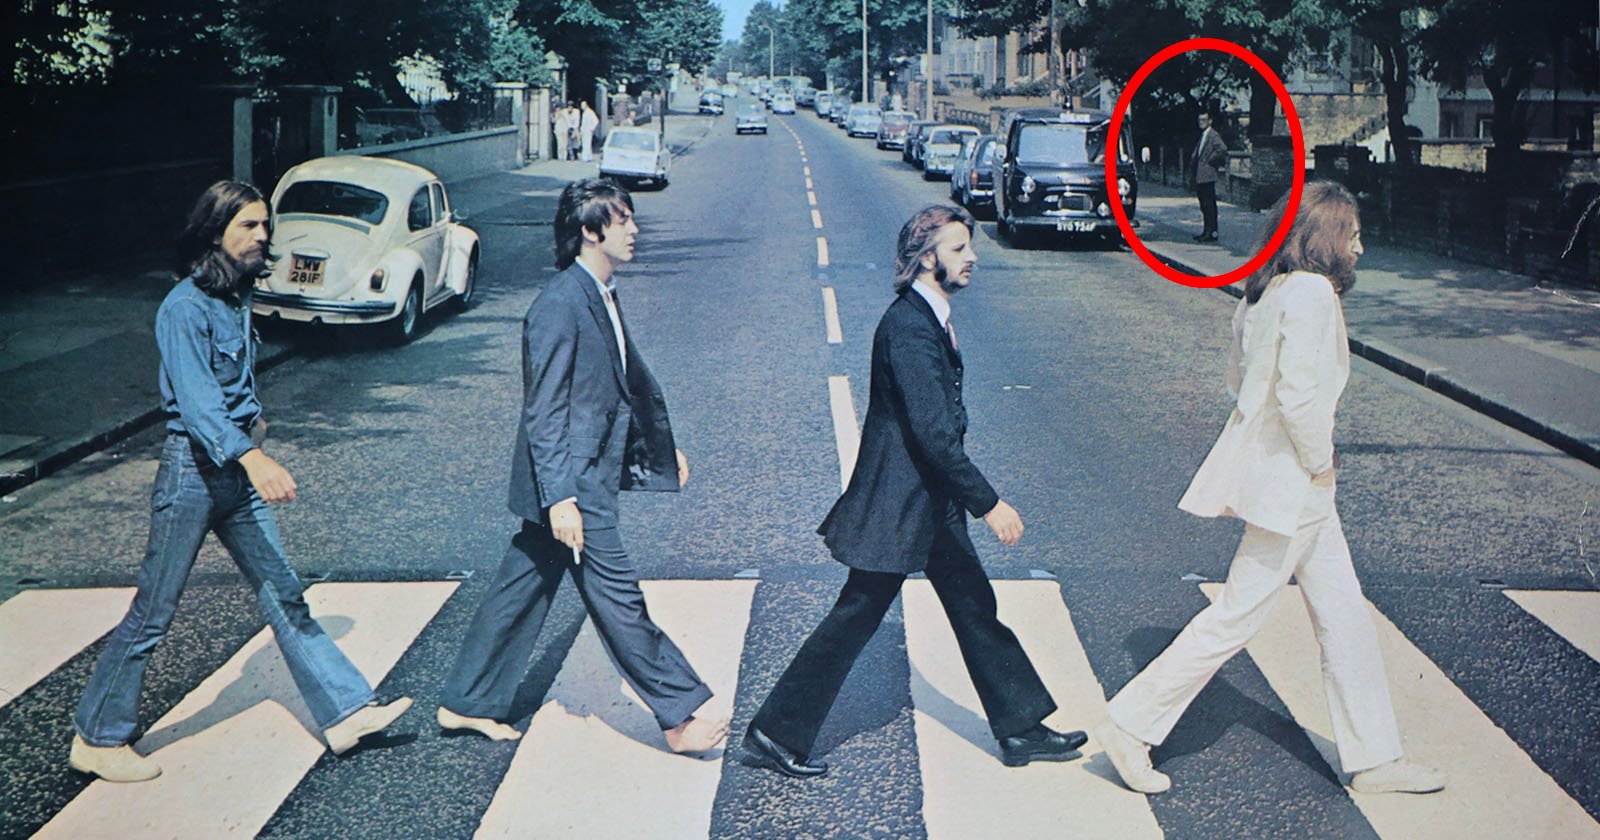 Four men crossing a zebra crossing on a street, with one of them circled in red. cars are parked on both sides of the road, under a clear sky.